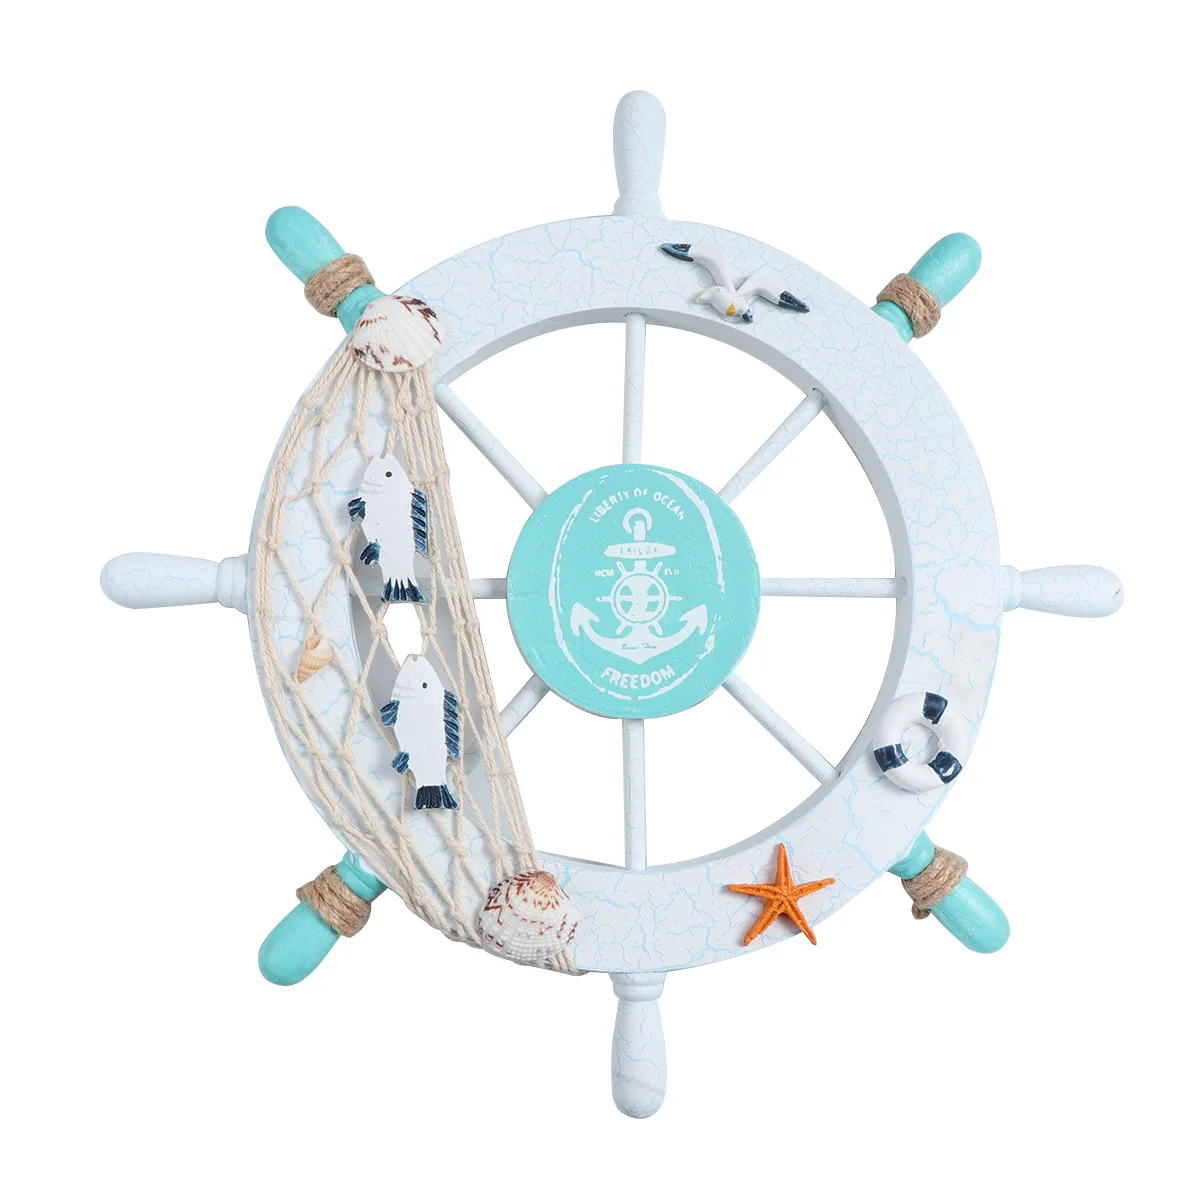 

Wheel Decor Ship Nautical Wall Wooden Steering Beach Boat Bathroom Home Decoration For Decorations Anchor Fishing Net Art Pirate